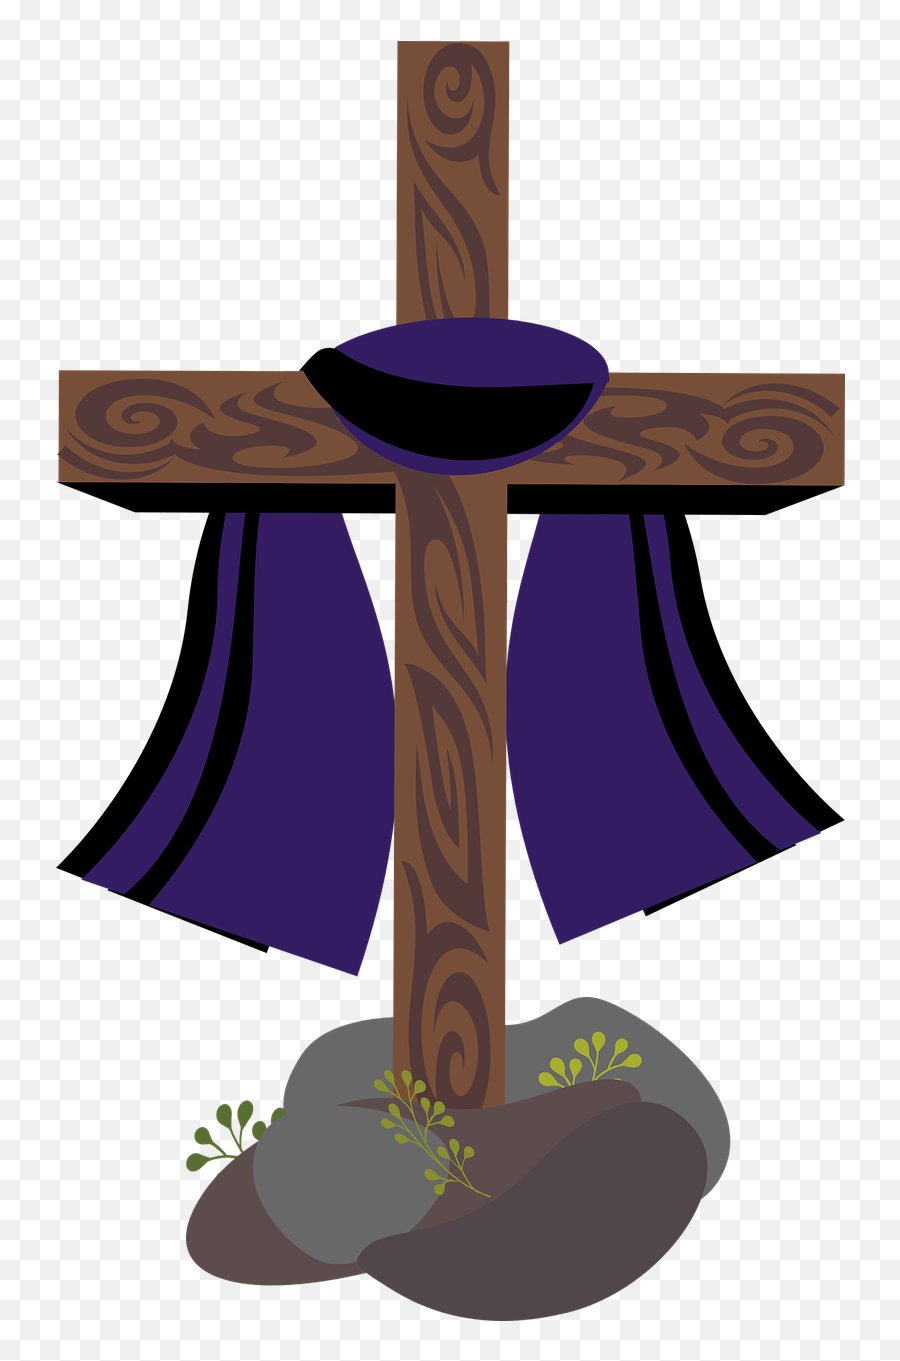 Nina Garman - Holy Week And Easter Clipart Cross With Crown Of Thorns Clipart Emoji,Easter Emojis